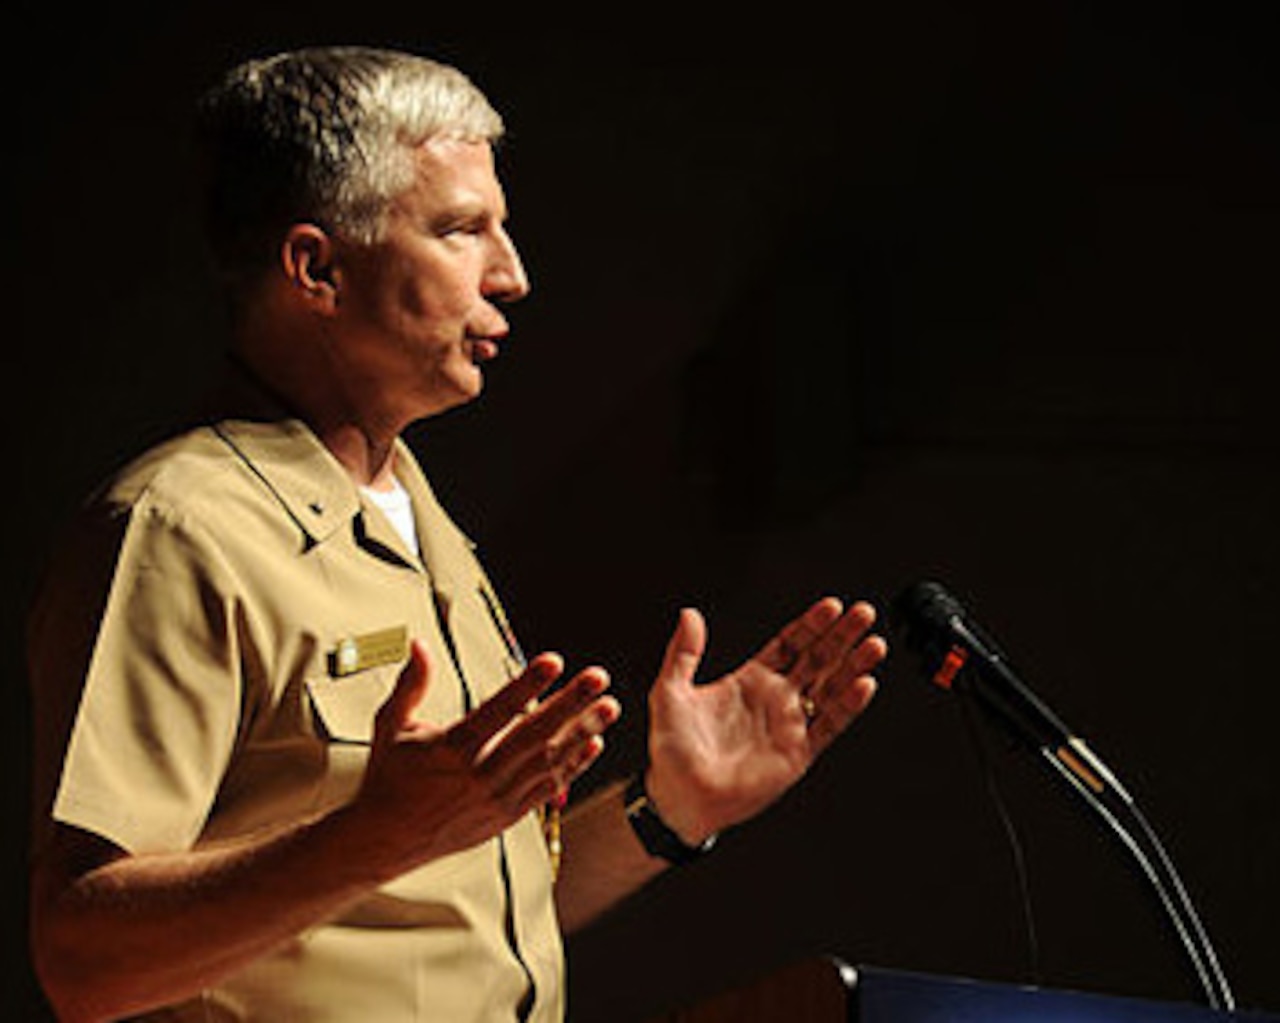 Navy Rear Adm. Craig S. Faller will be assigned as senior military assistant to Defense Secretary Jim Mattis. Faller is pictured delivering remarks during a change-of-command ceremony at Naval Support Activity Mid-South in Millington, Tenn., April 21, 2011. At the ceremony, Faller passed command of Navy Recruiting Command to Navy Rear Adm. Robin L. Graf. Faller continued on as commander of Carrier Strike Group 3. Navy photo by Petty Officer 1st Class Christopher D. Blachly